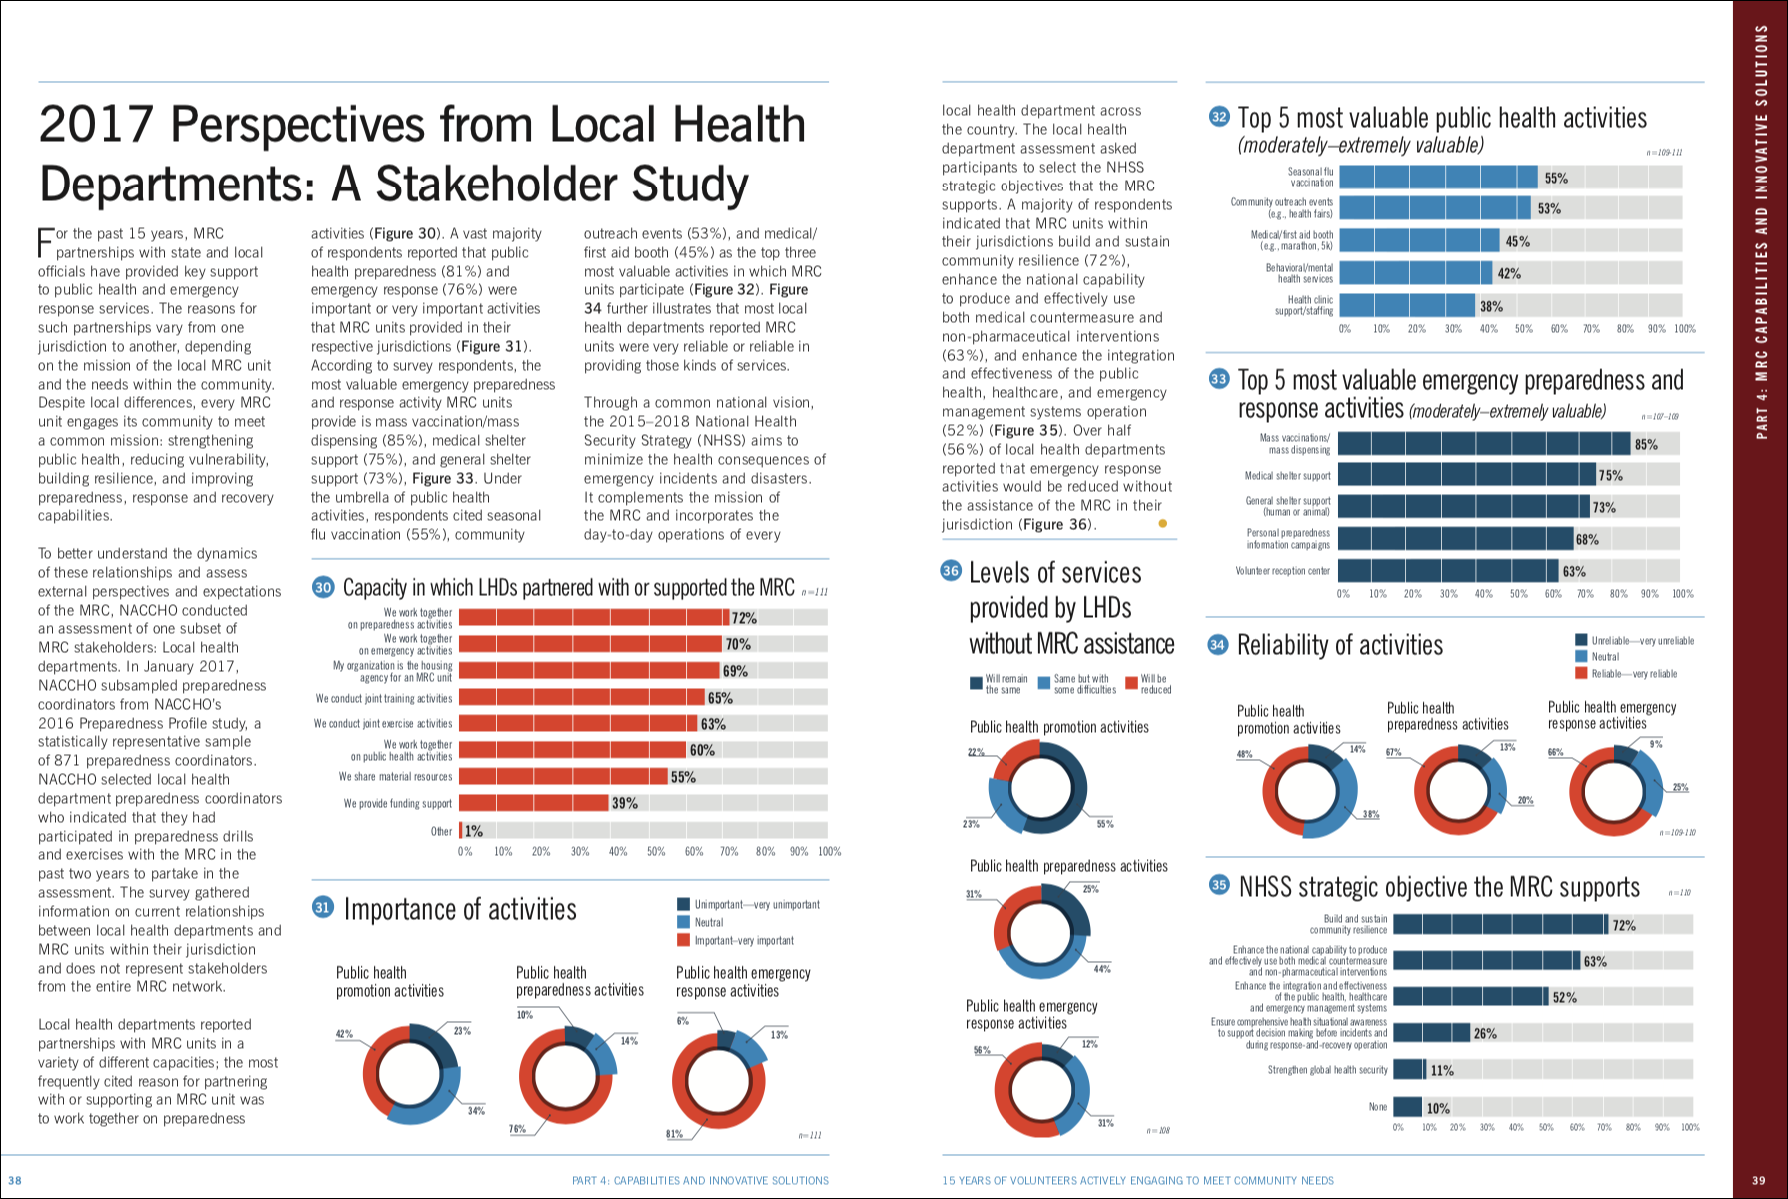 NACCHO 2017 Perspectives from Local Departments: A Stakeholder Study—straightforward charts made the most sense in this report because a complete narrative accompanied them.